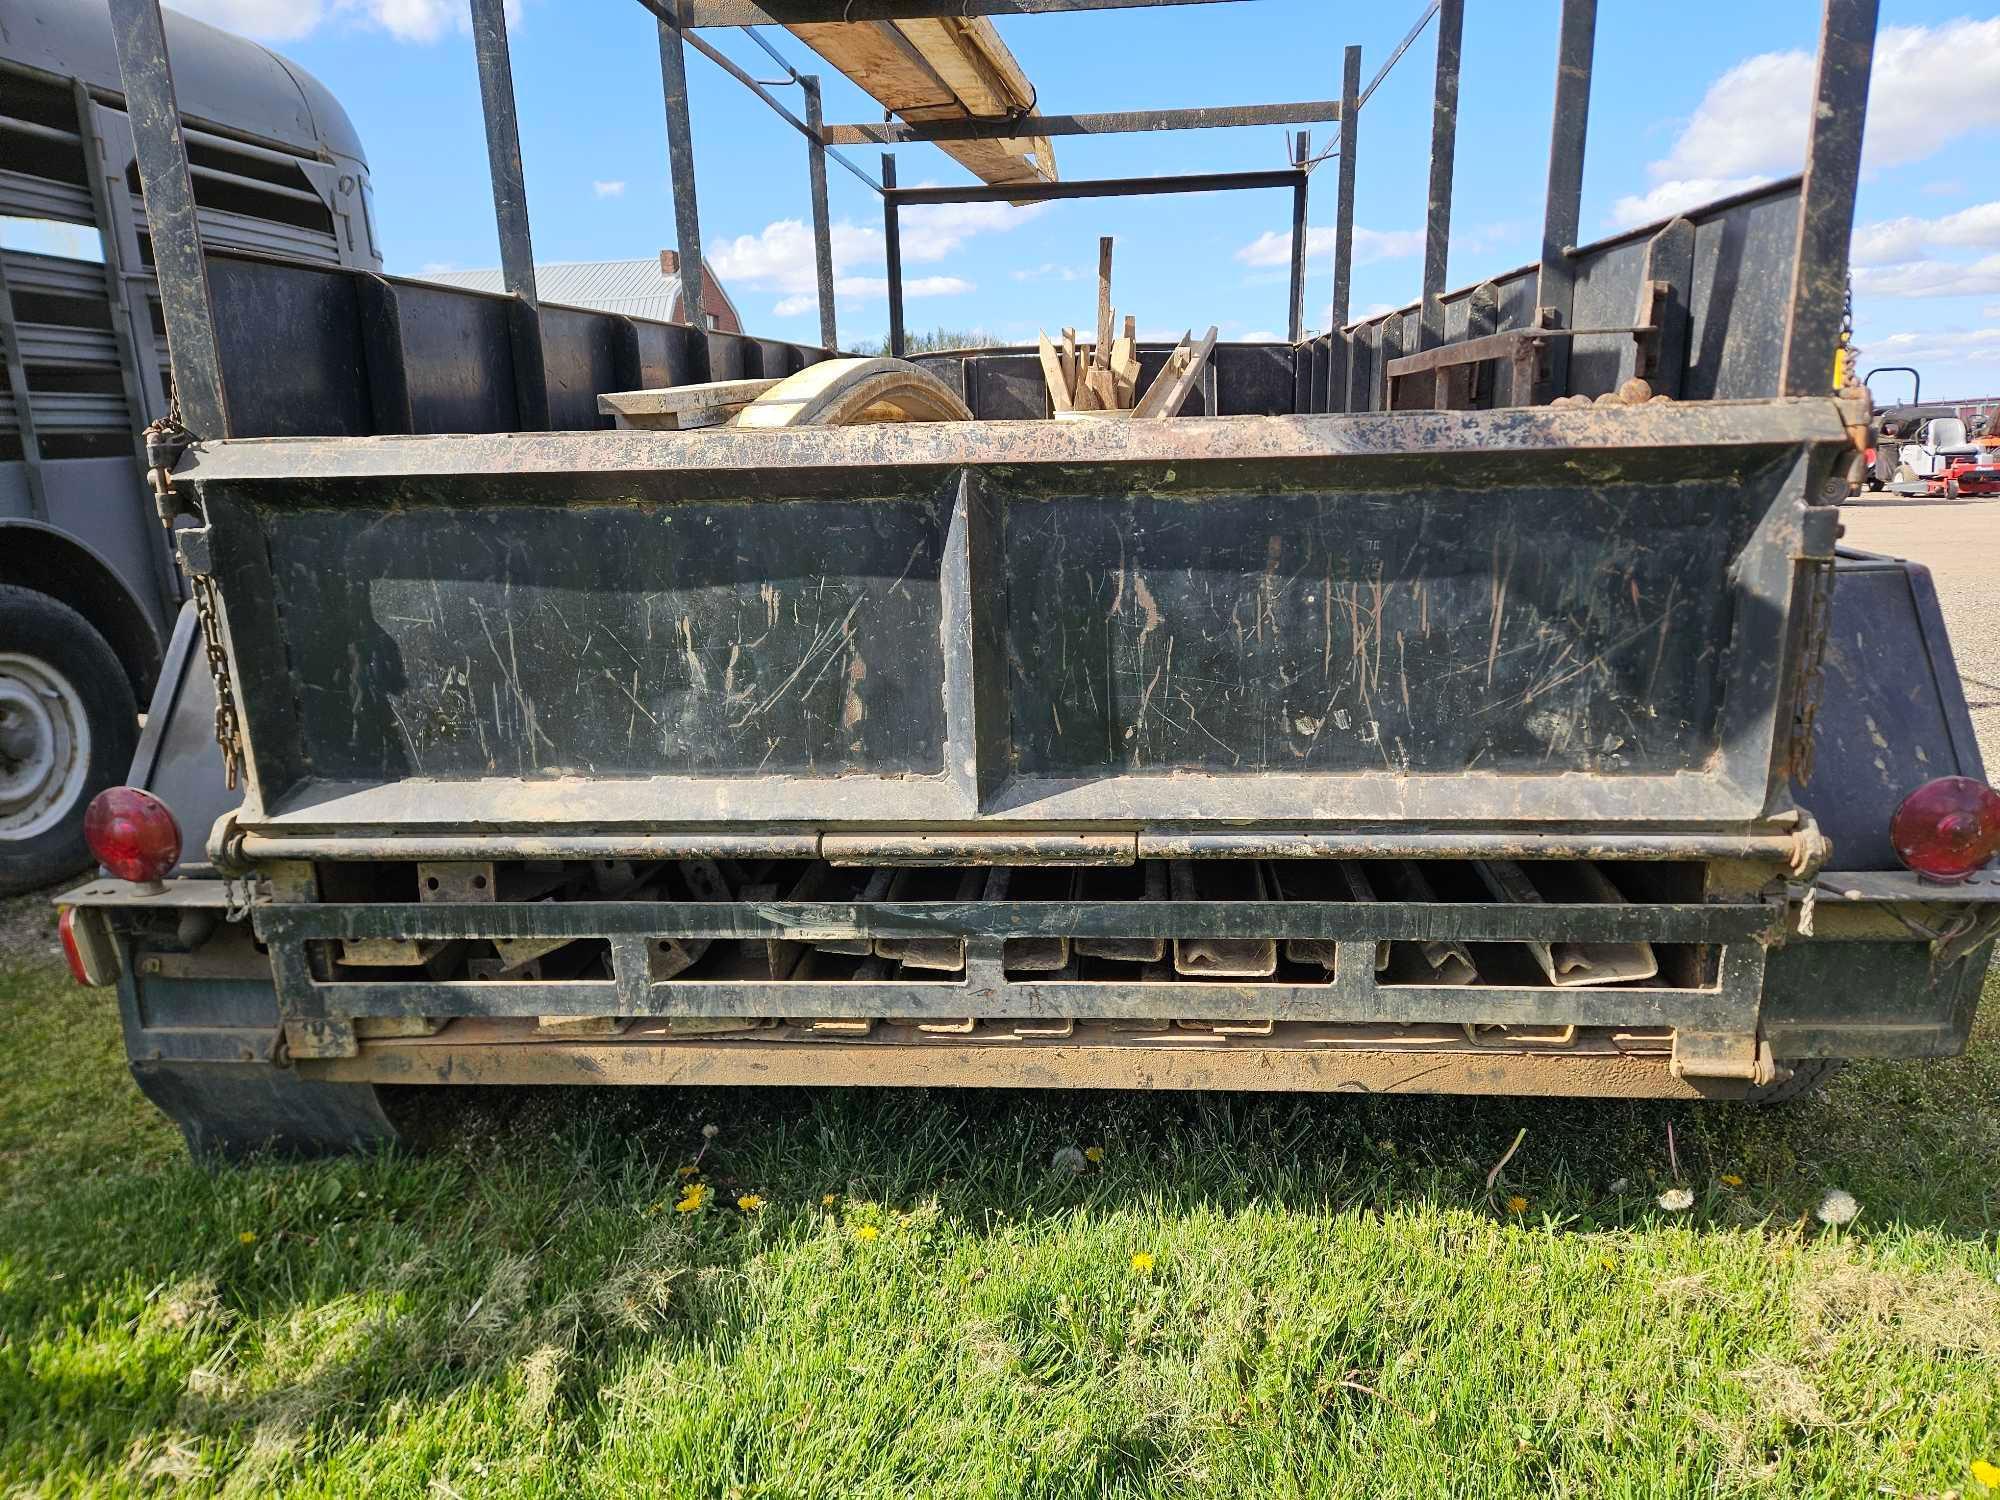 14ft concrete work trailer with forms and pins